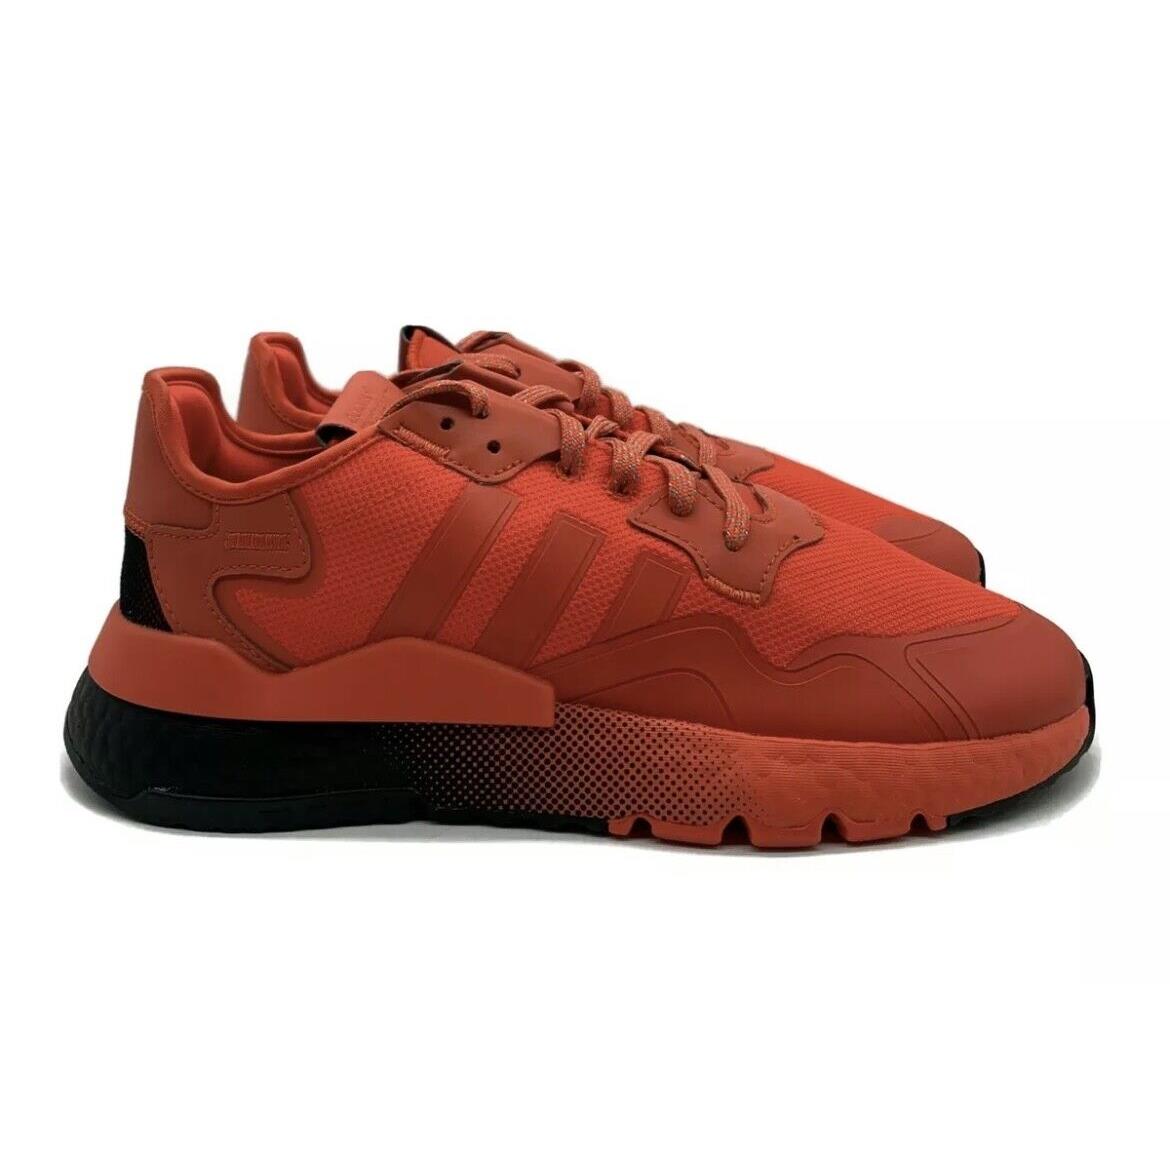 Adidas Nite Jogger Mens Casual Running Shoe Red Black Trainer Fashion Sneaker